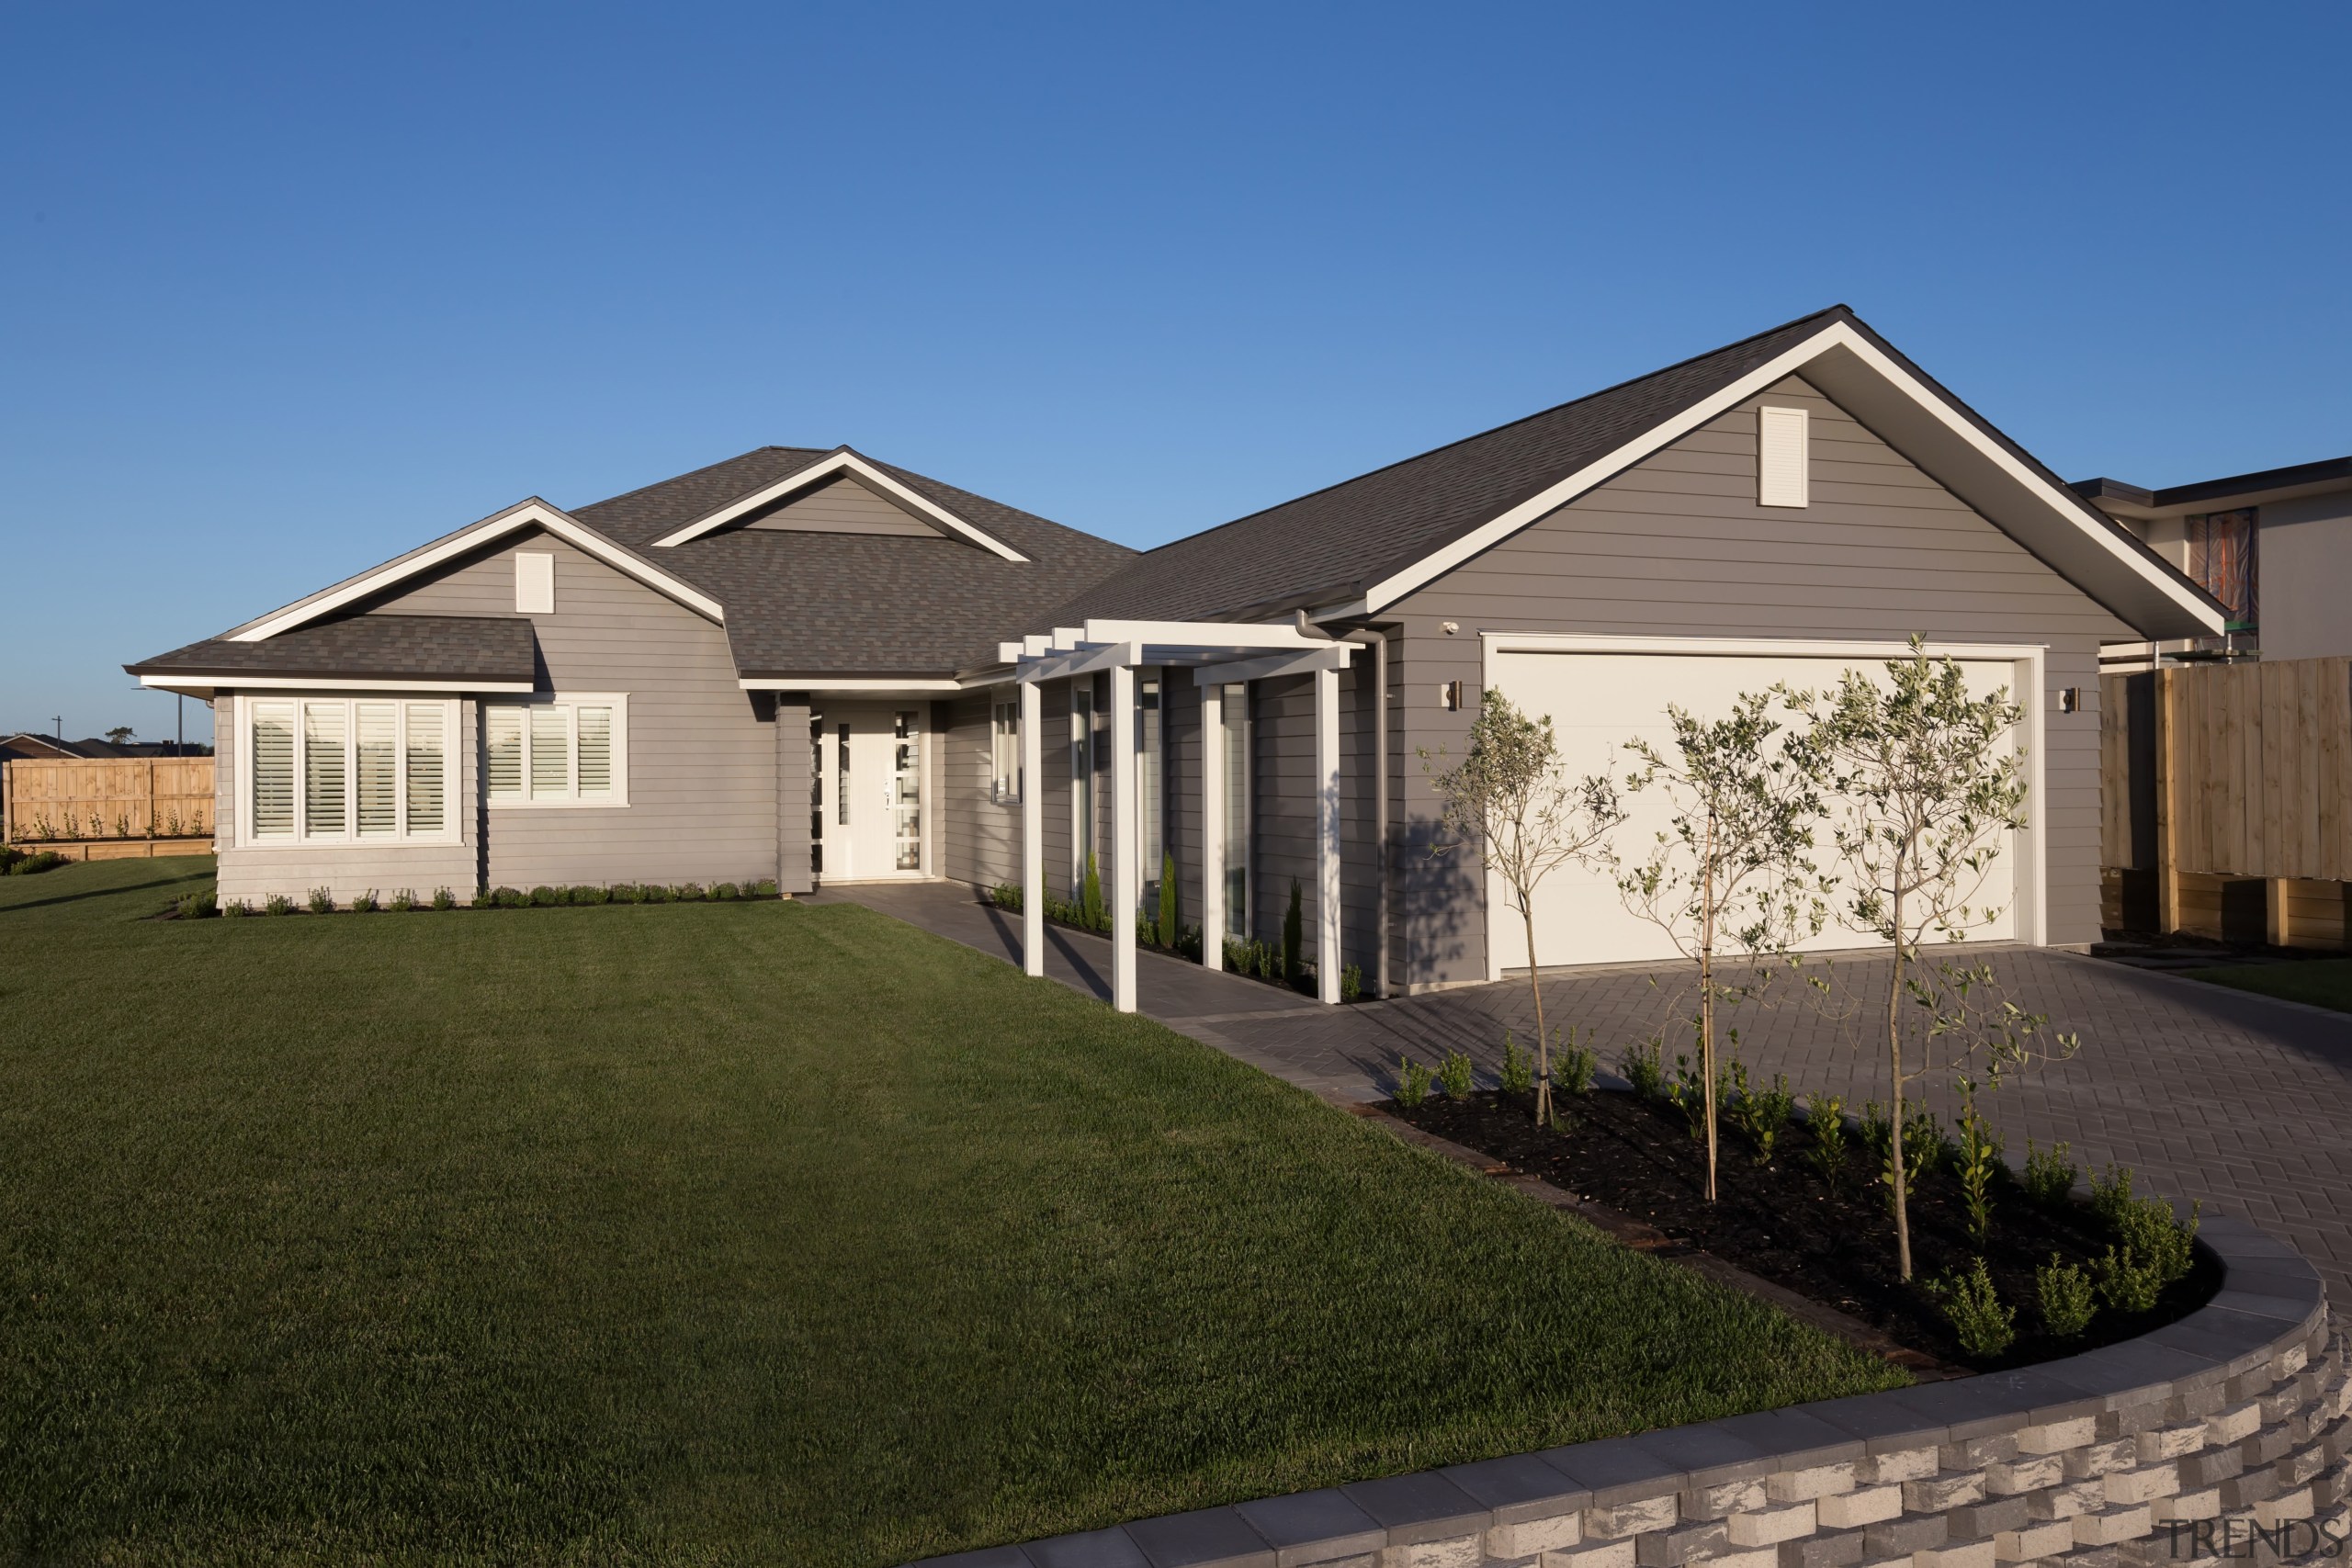 The new Landmark Homes Brookside show home in building, cottage, elevation, estate, facade, farmhouse, grass, home, house, landscape, lawn, property, real estate, residential area, roof, siding, suburb, window, yard, brown, teal